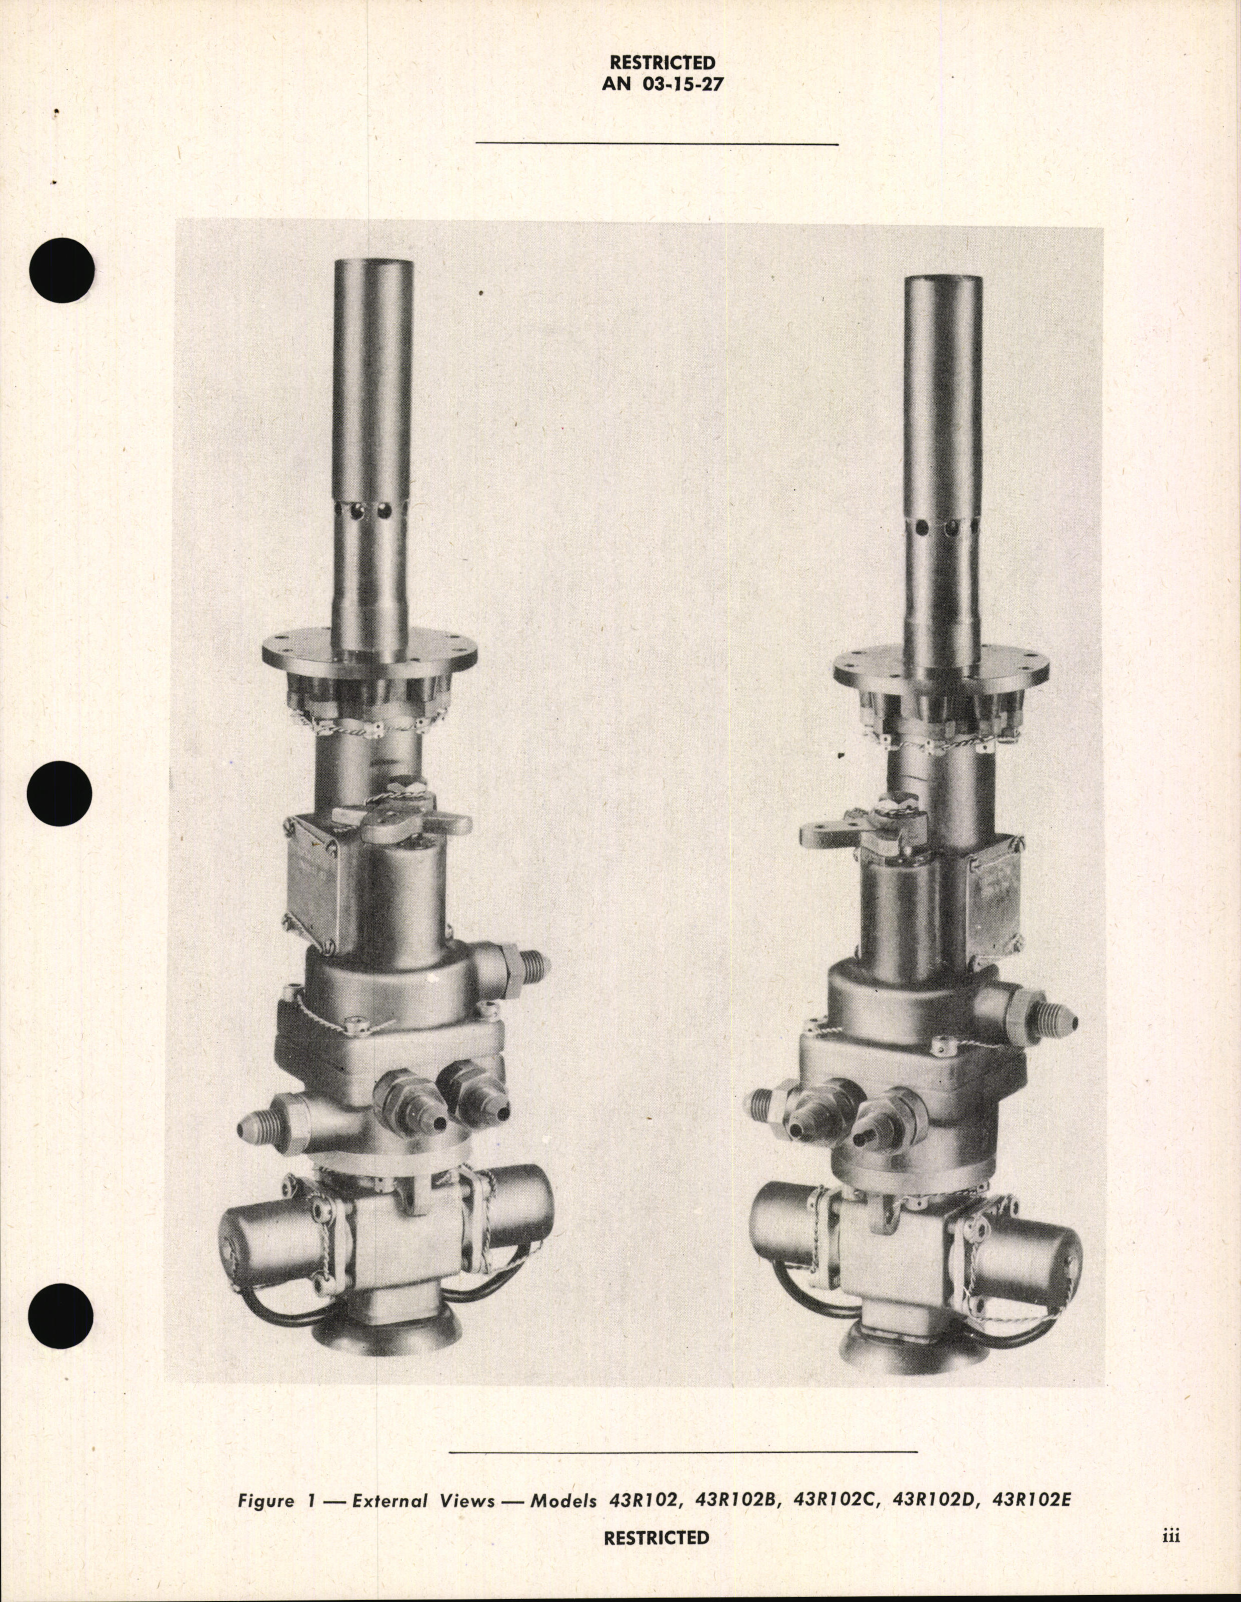 Sample page 5 from AirCorps Library document: Handbook of Instructions with Parts Catalog for Engine Coolant and Lubricating Oil Temperature Controls